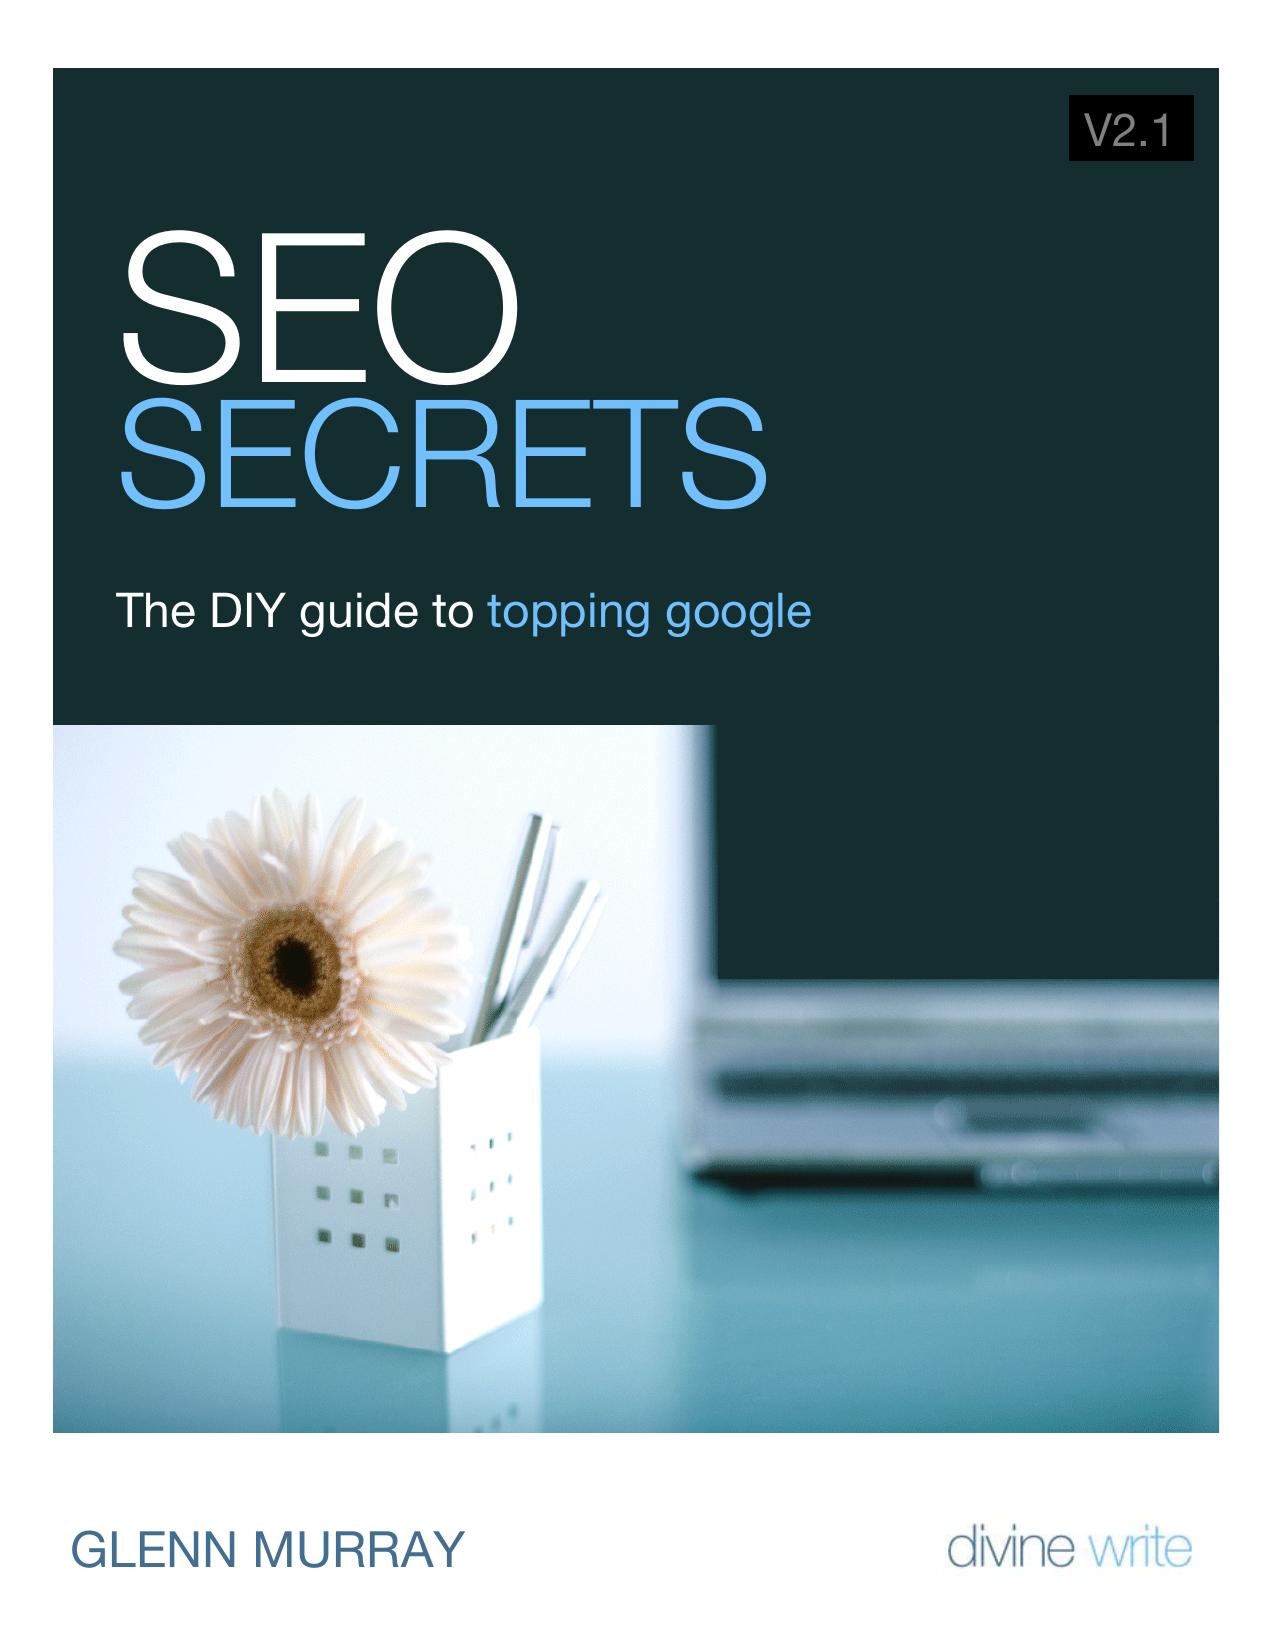 SEO Secrets The DIY guide to topping google